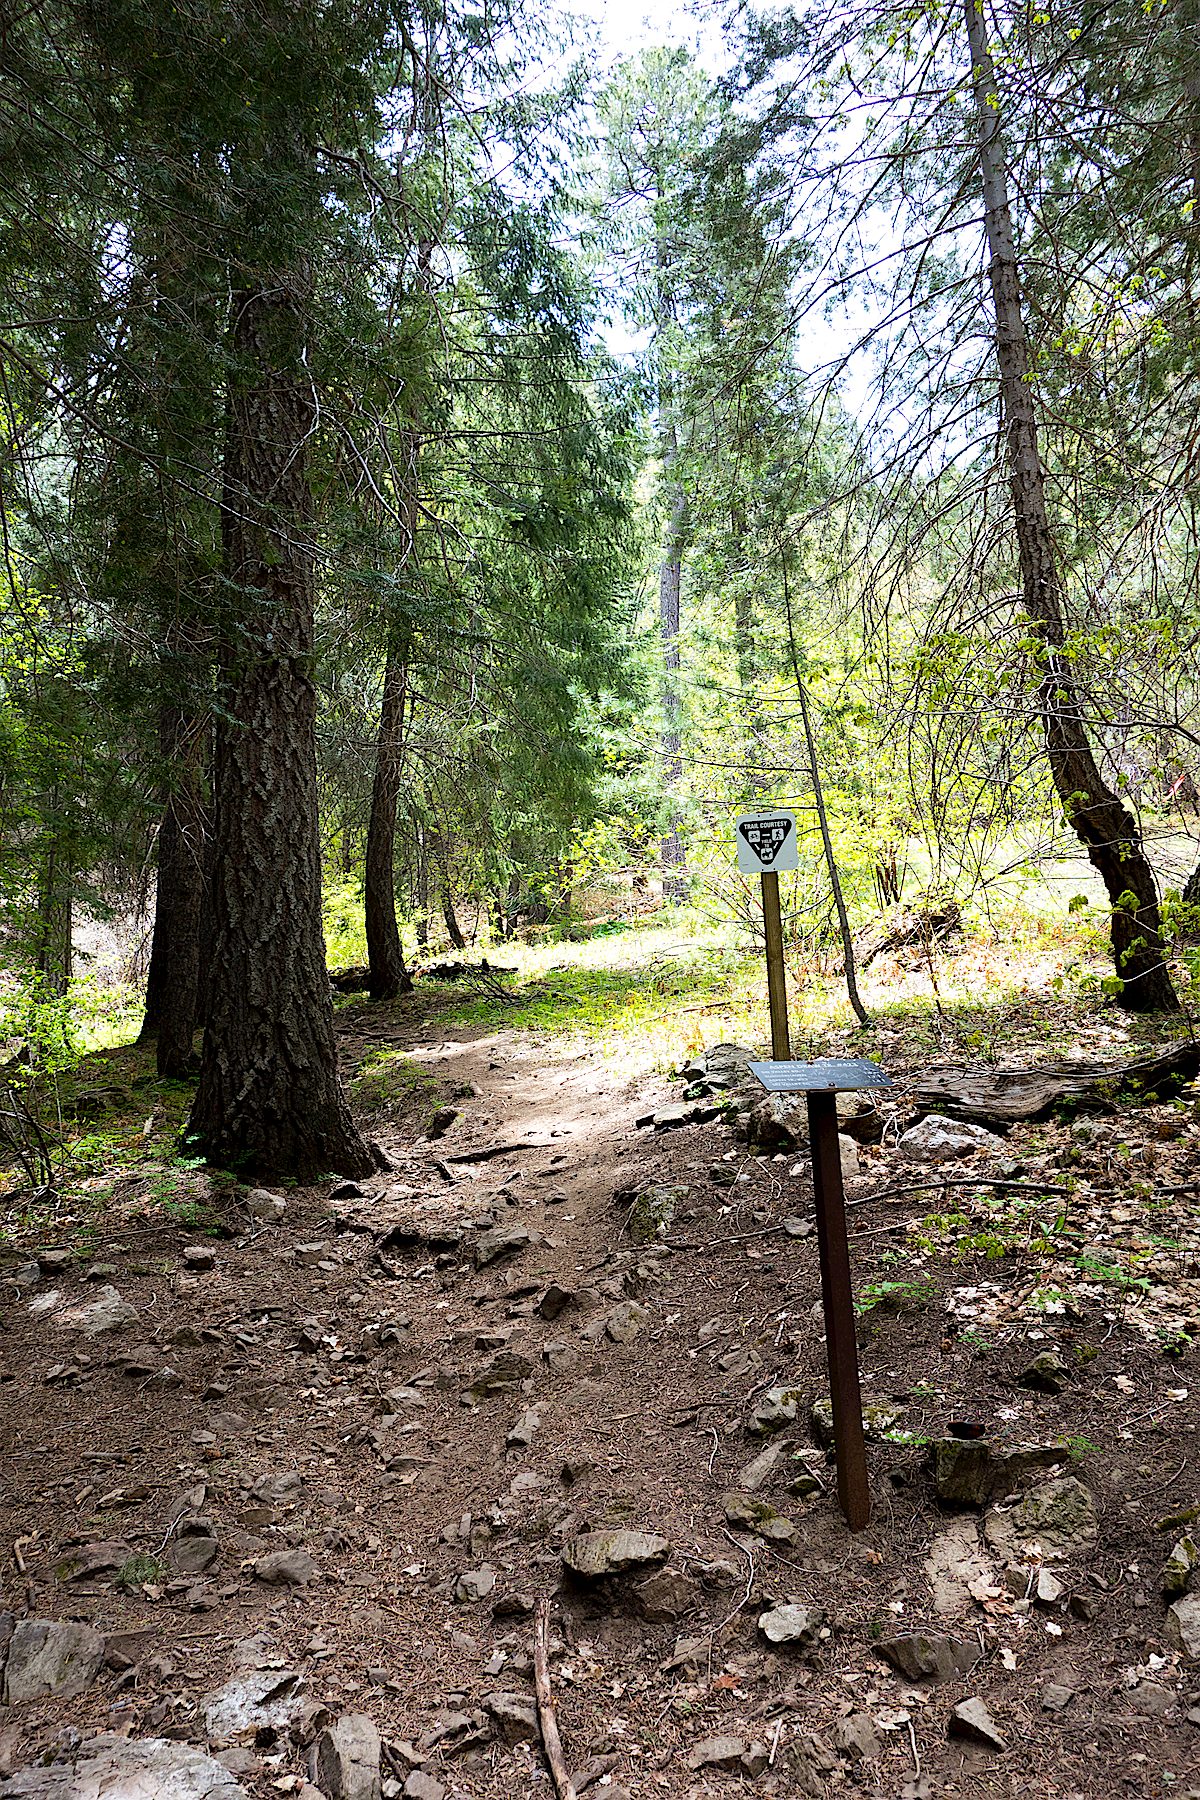 Trail sign at the junction for the trail to Ski Run Road. May 2014.